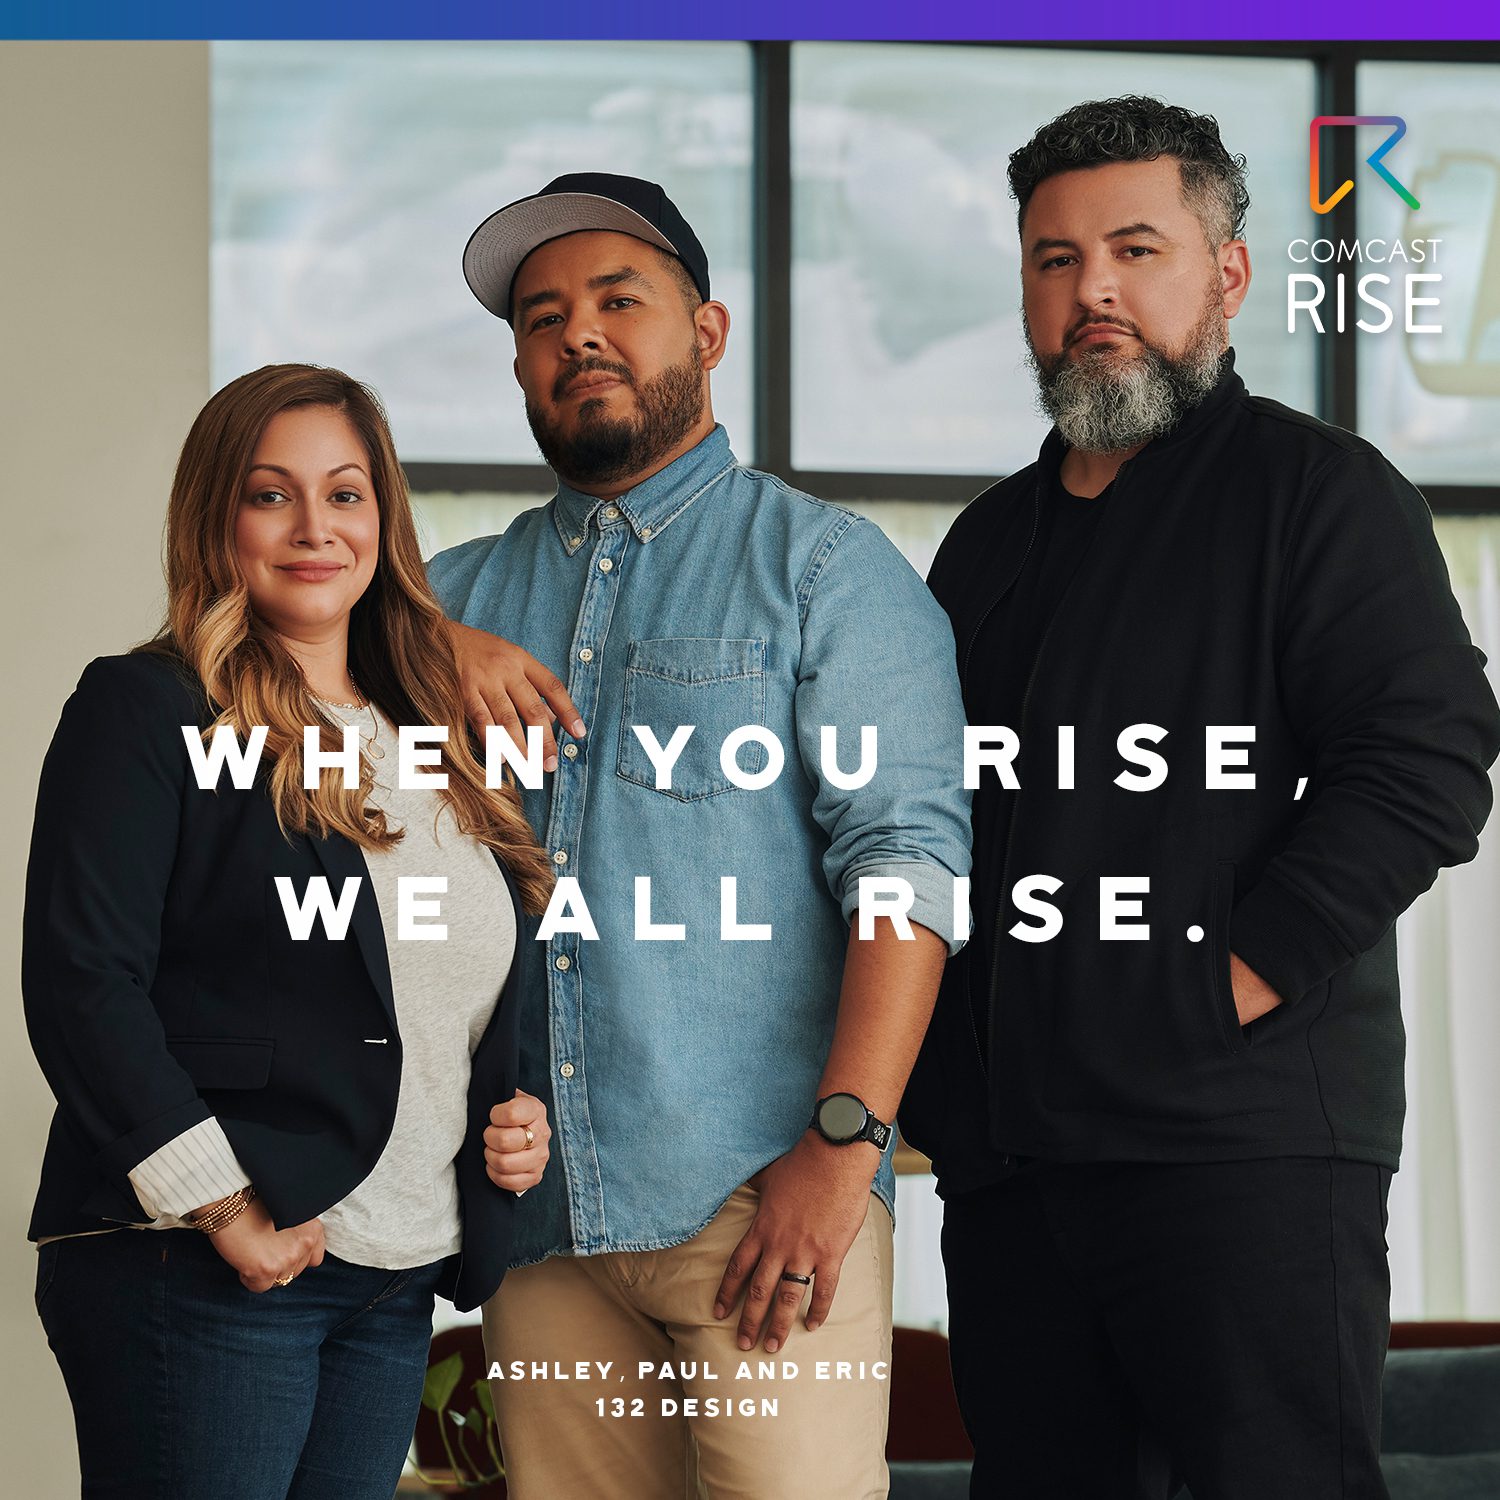 STARTING TOMORROW, SMALL BUSINESSES OWNED BY PEOPLE OF COLOR IN THE TWIN CITIES MAY APPLY FOR $10,000 GRANTS FROM COMCAST RISE